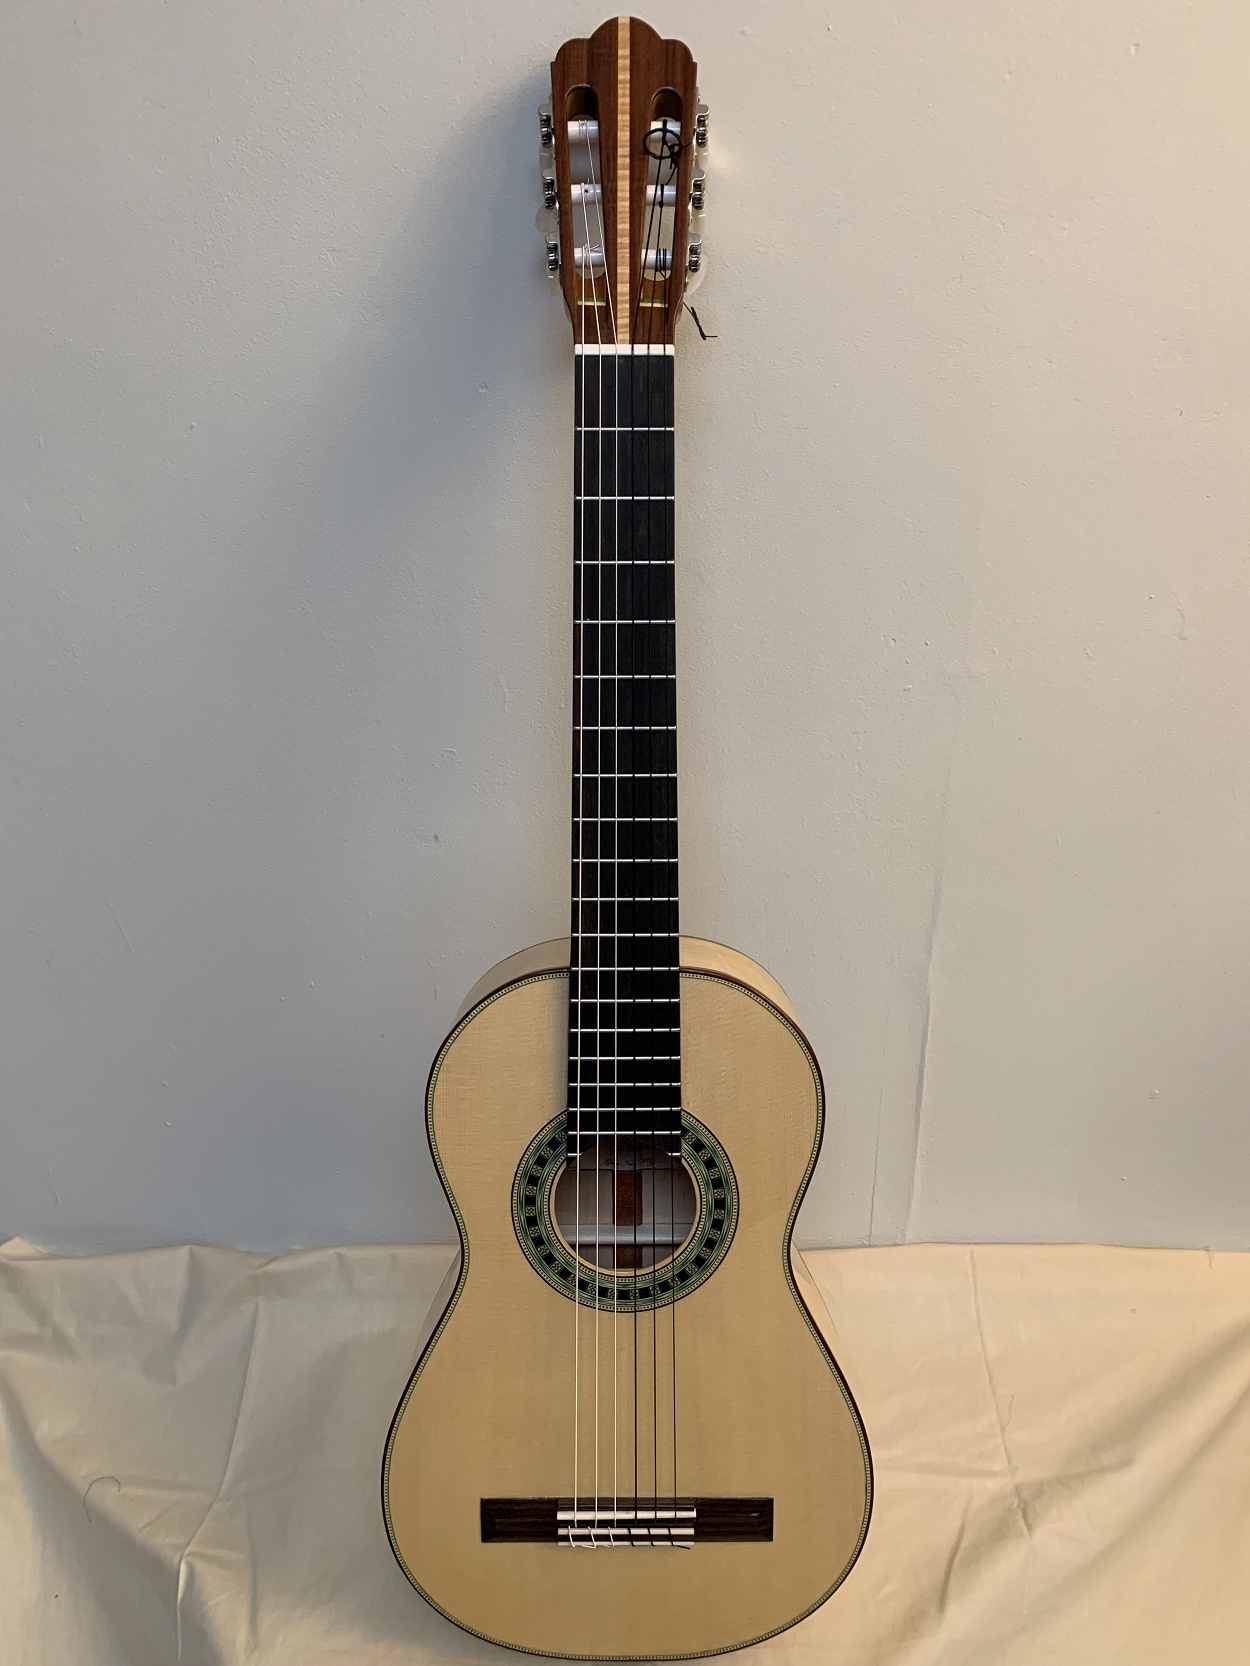 A Rios Nebro Concert Classical Guitar Torres FE17 model Spruce top, Maple back and sides